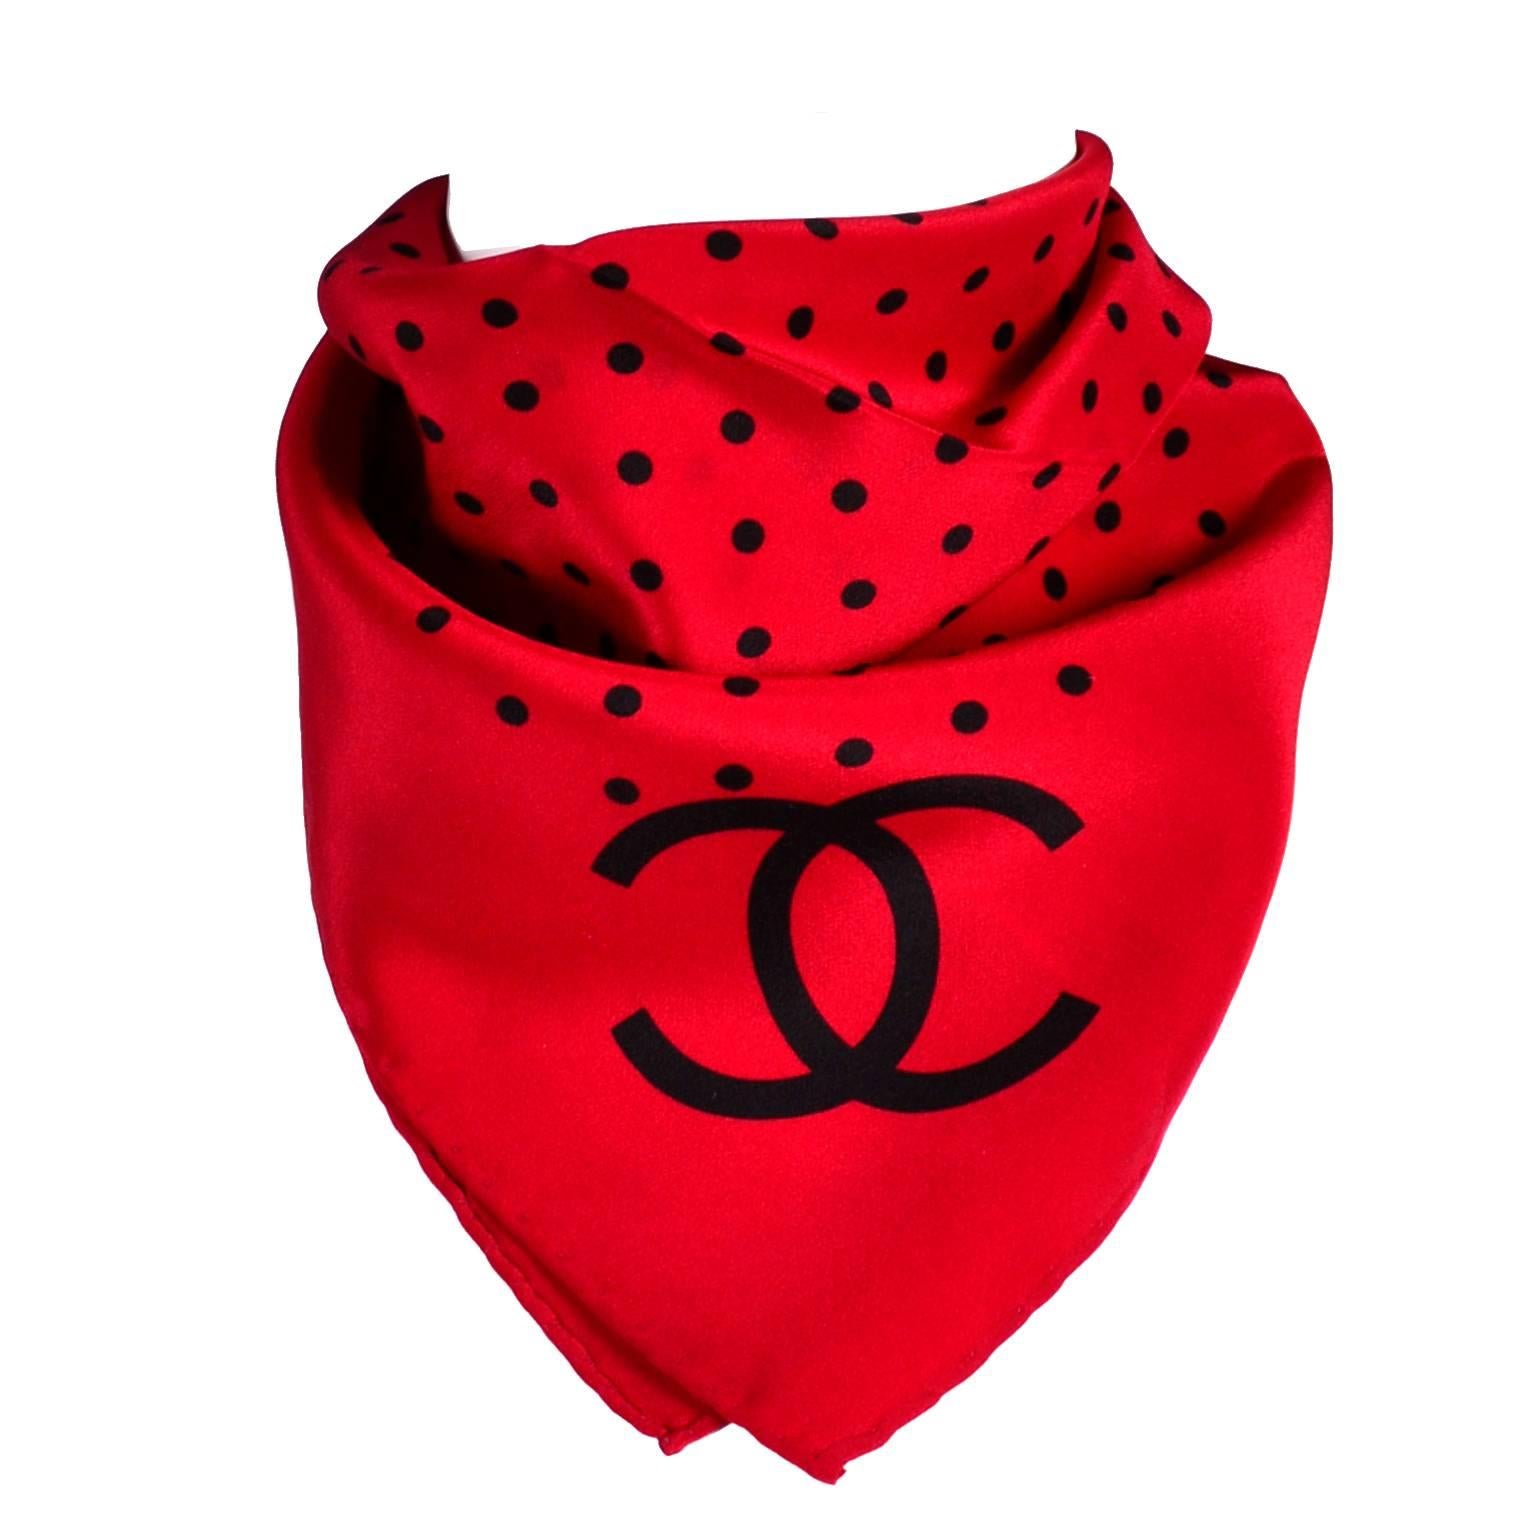 Vintage Chanel Scarf in Red & Black Dots Silk CC Logo Perfect Holiday Gift